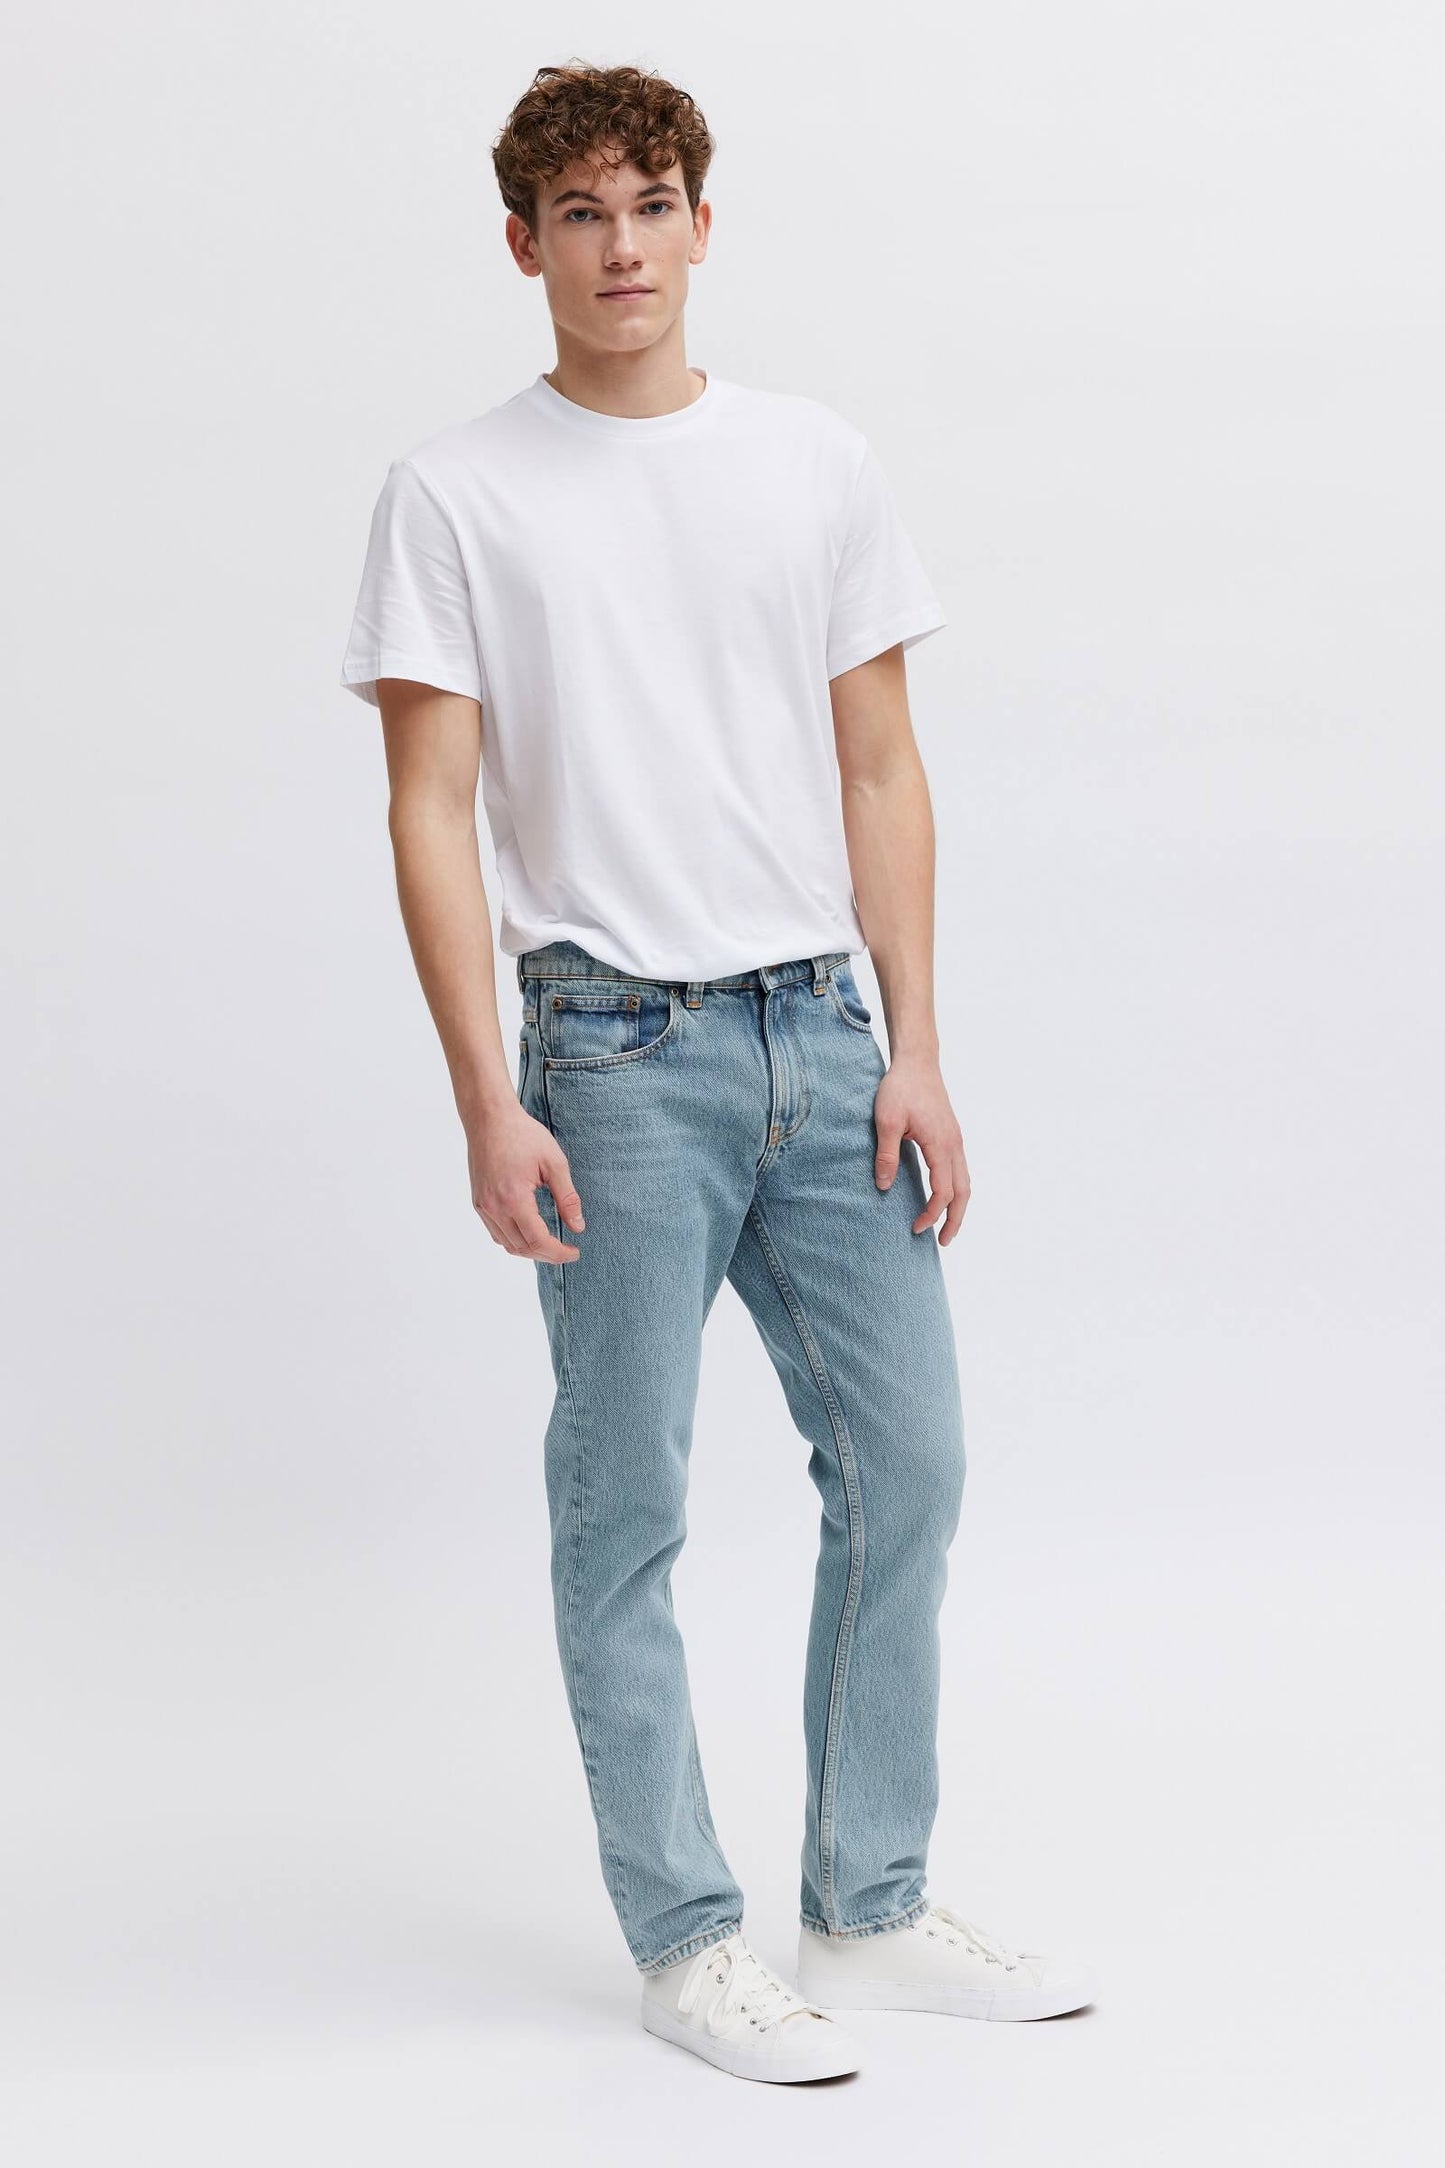 Perfect Organic Jeans for Men - GOTS Certified Cotton 